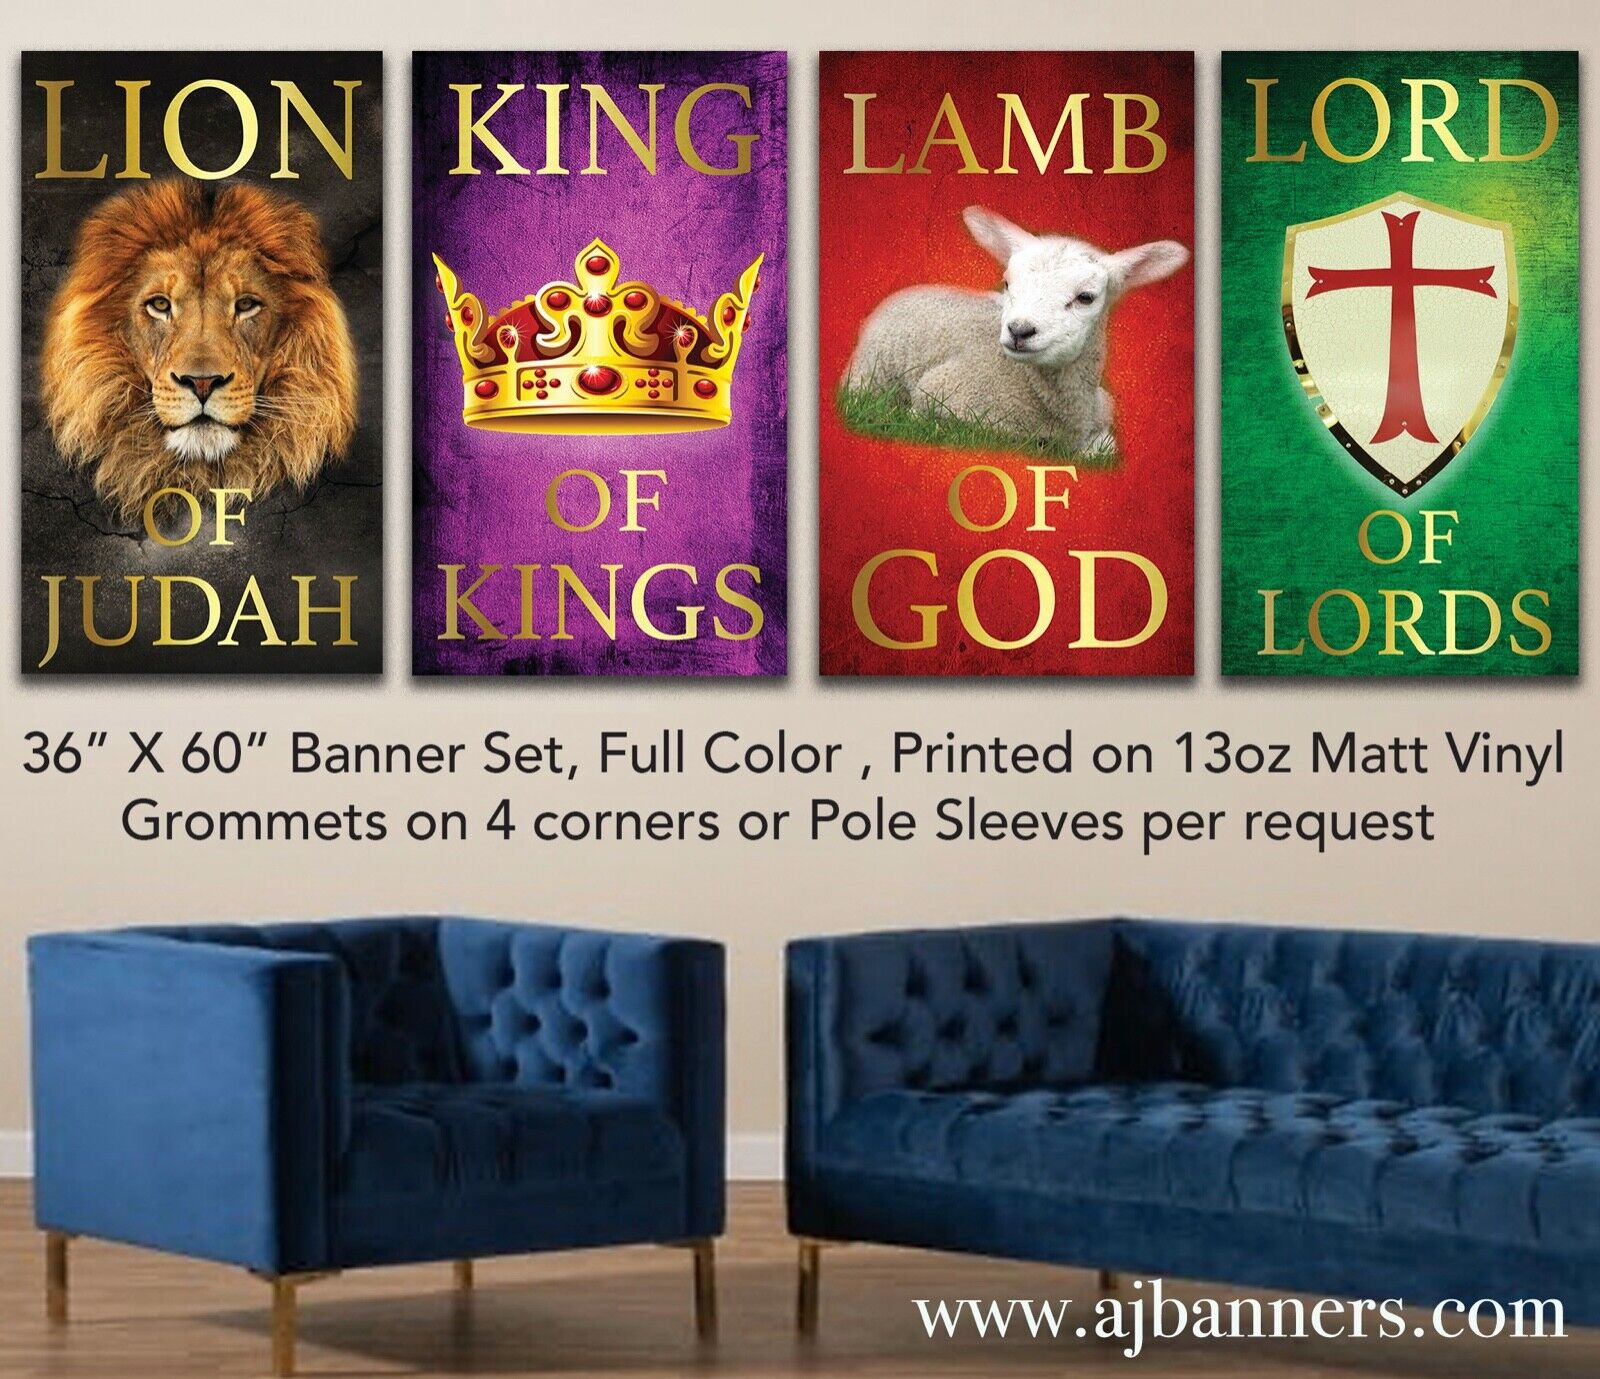 Church Banners - Lion of Judah, Lamb of God, Lord of Lords, King of Kings 